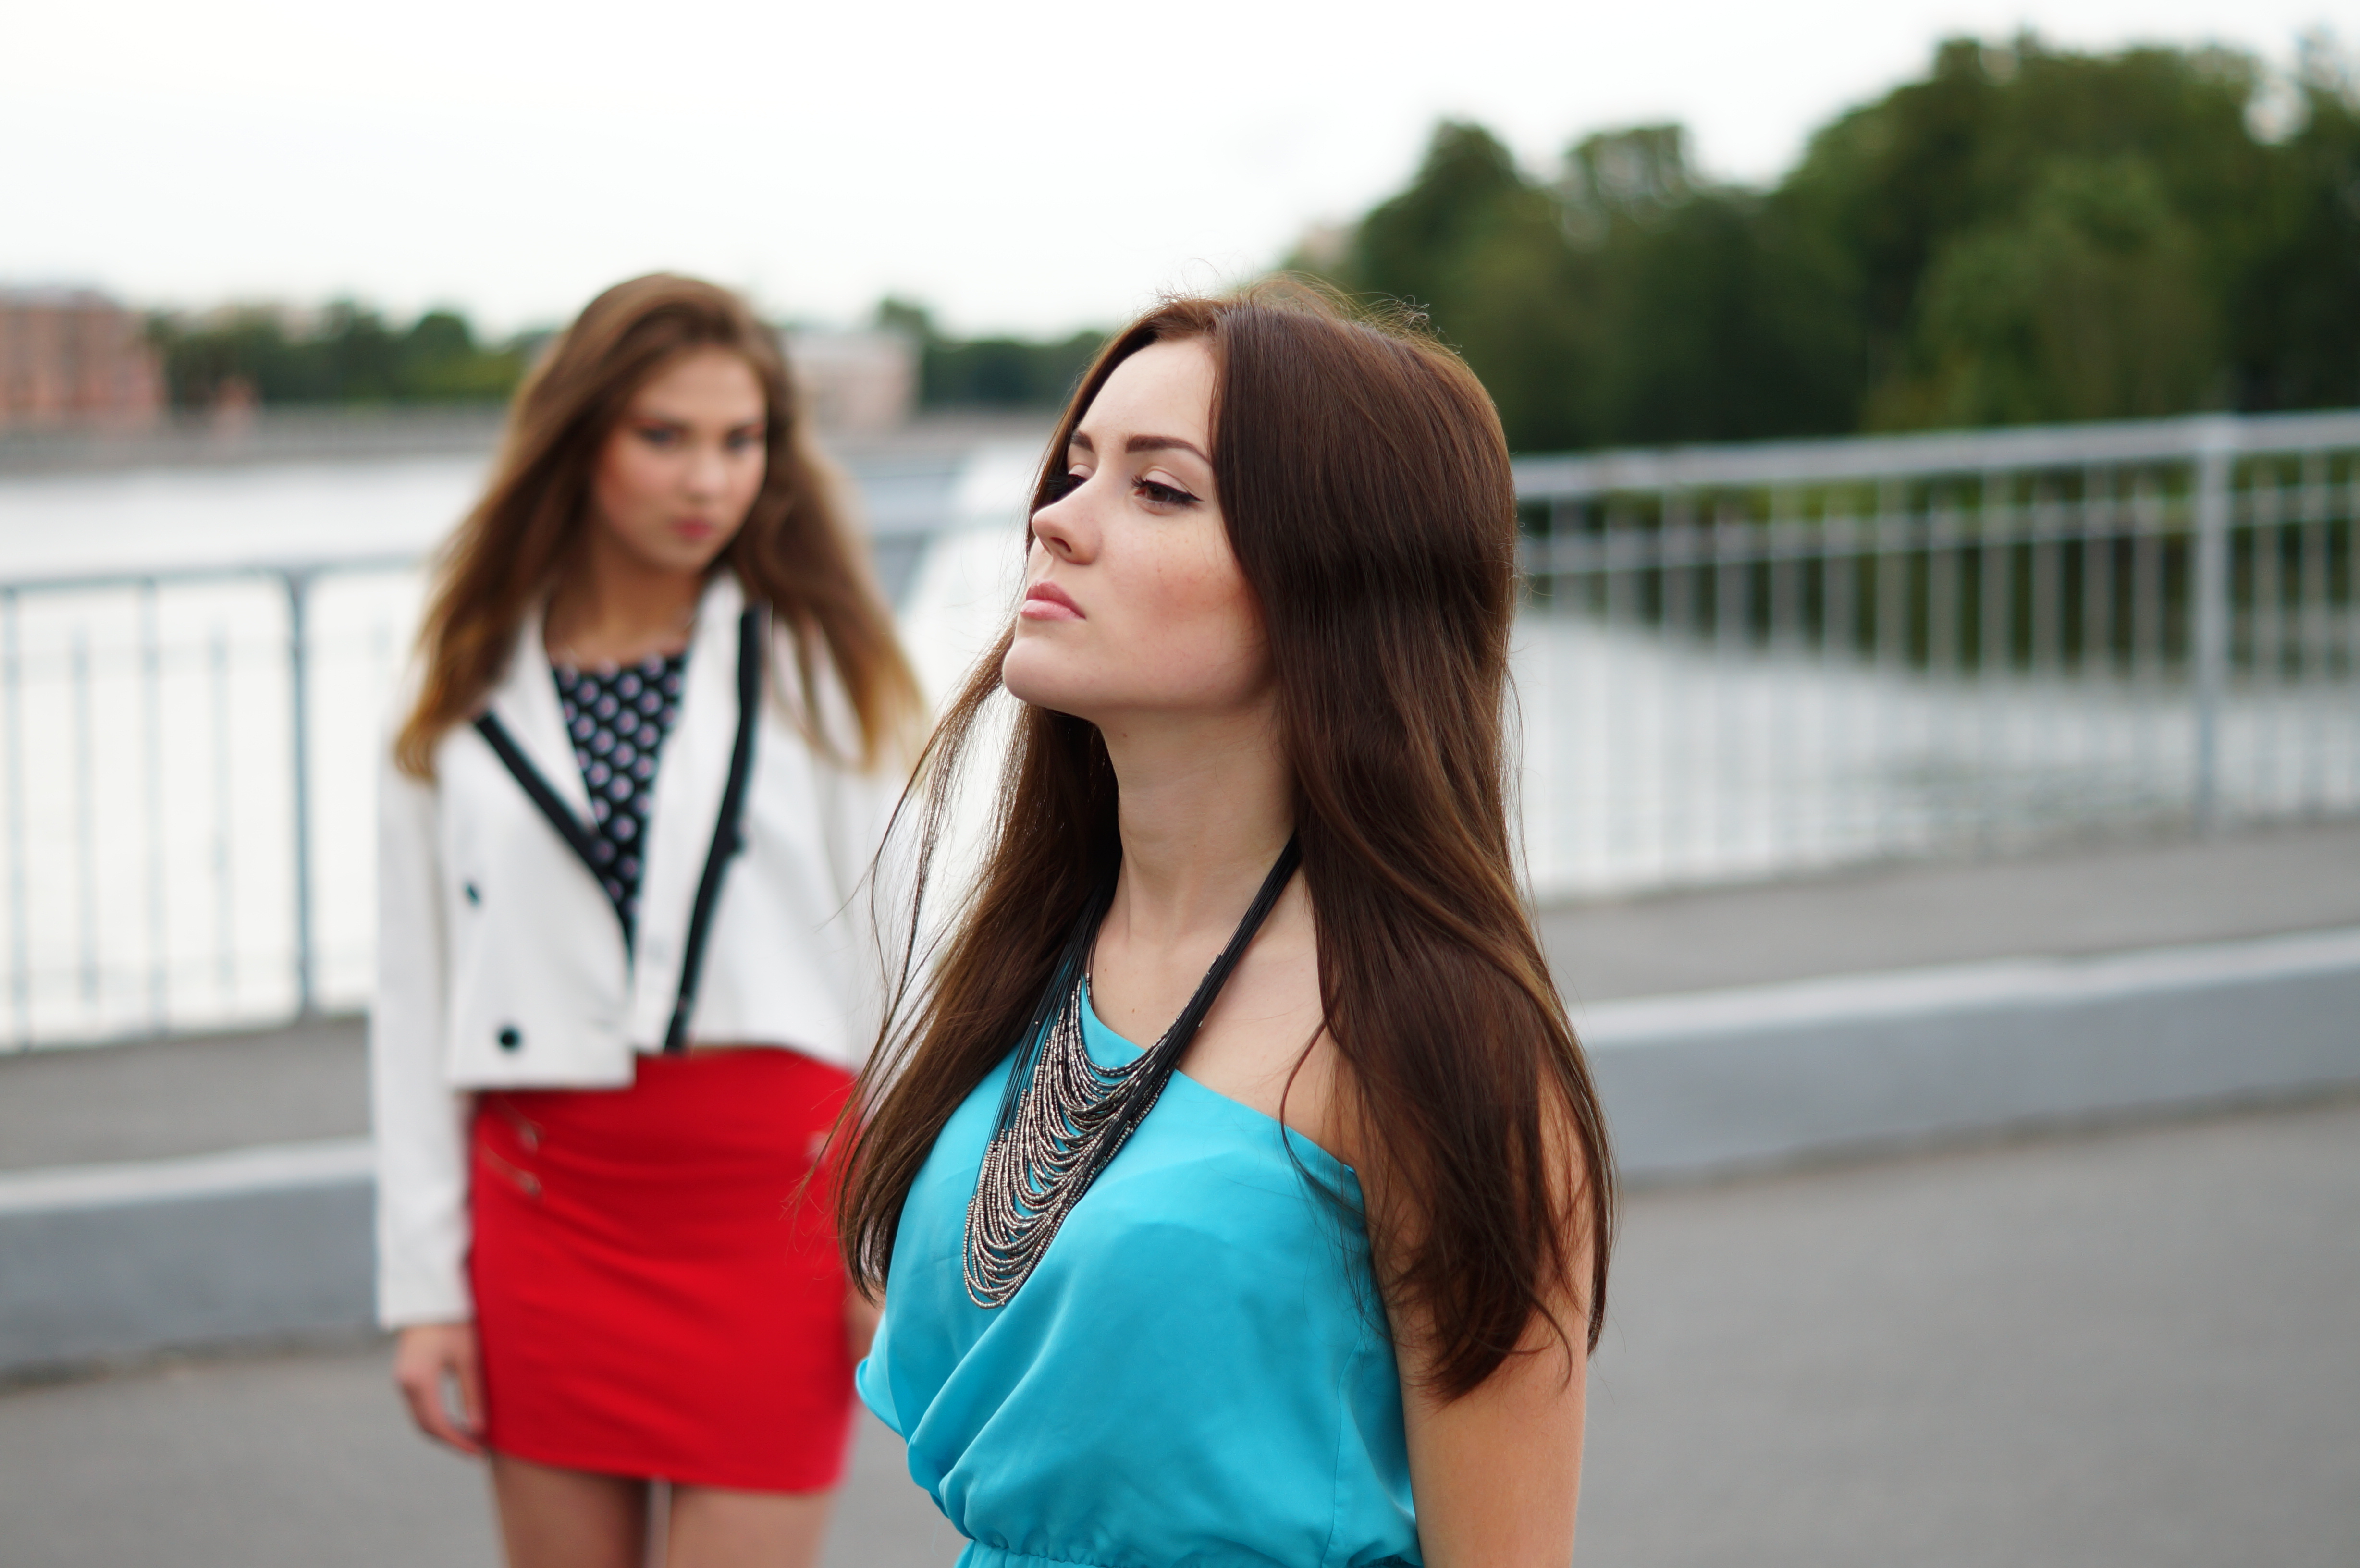 A woman looking away from an upset woman standing in the background | Source: Shutterstock